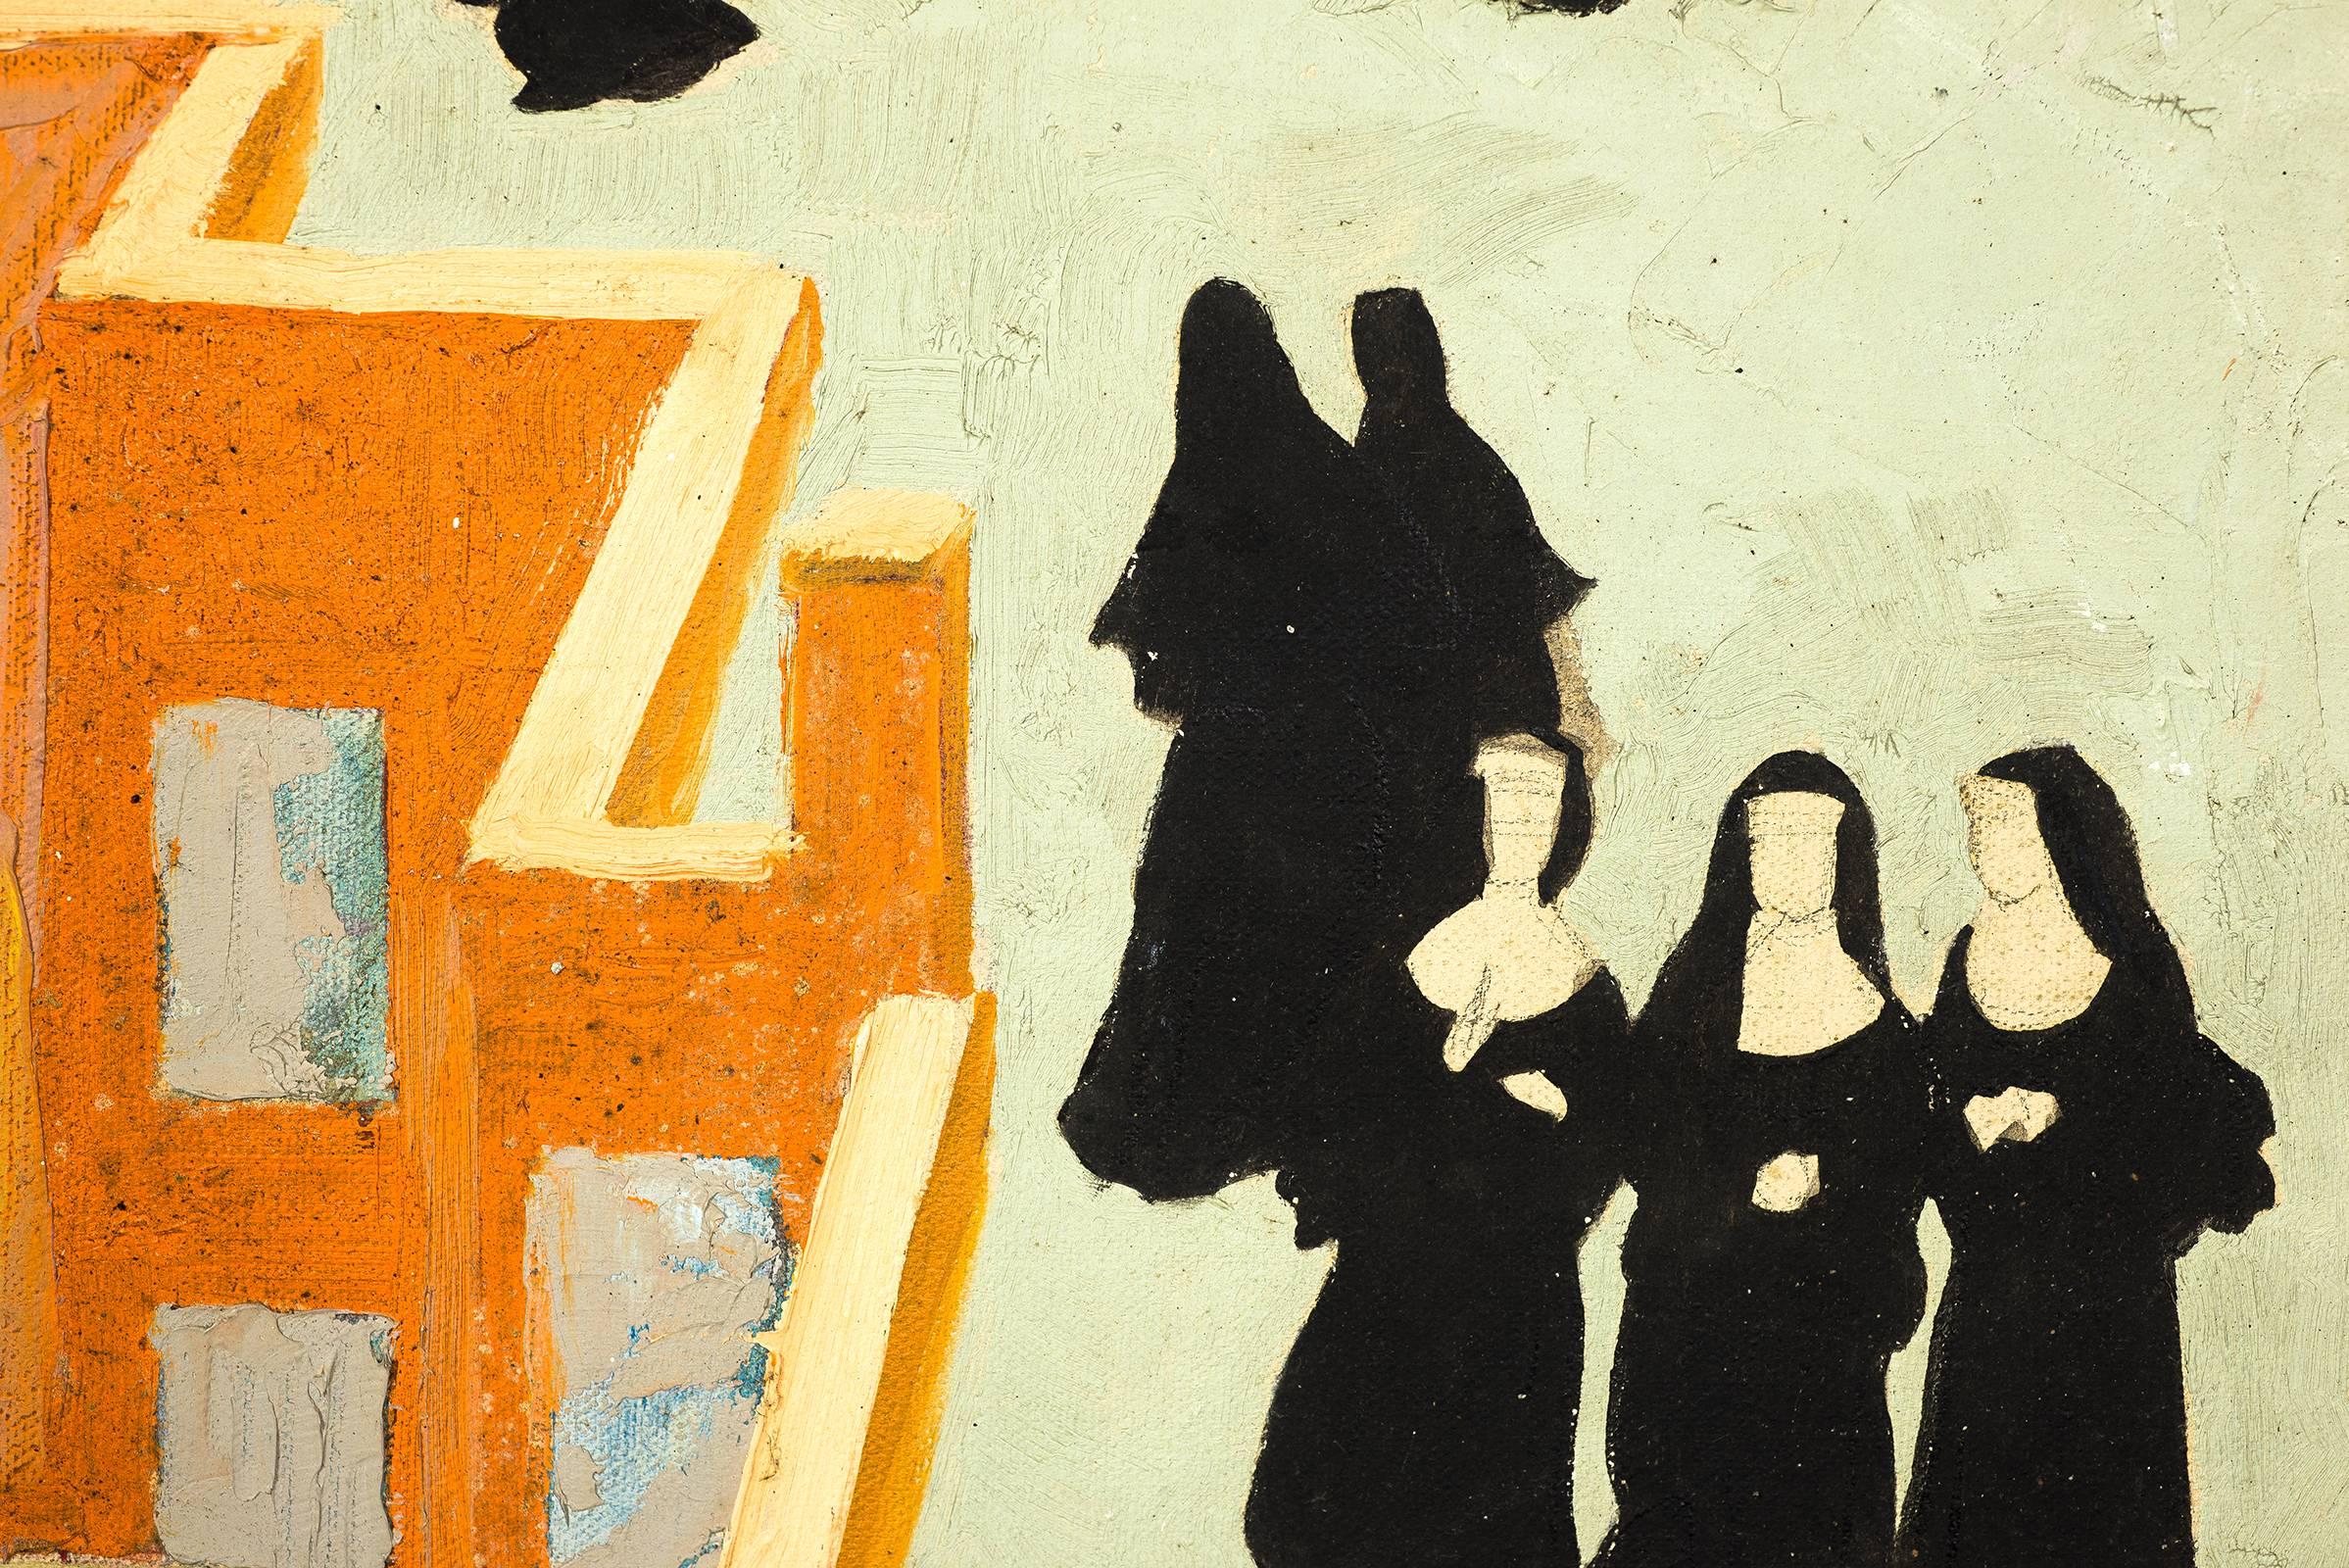 Nuns on Rooftop - Painting by Unknown